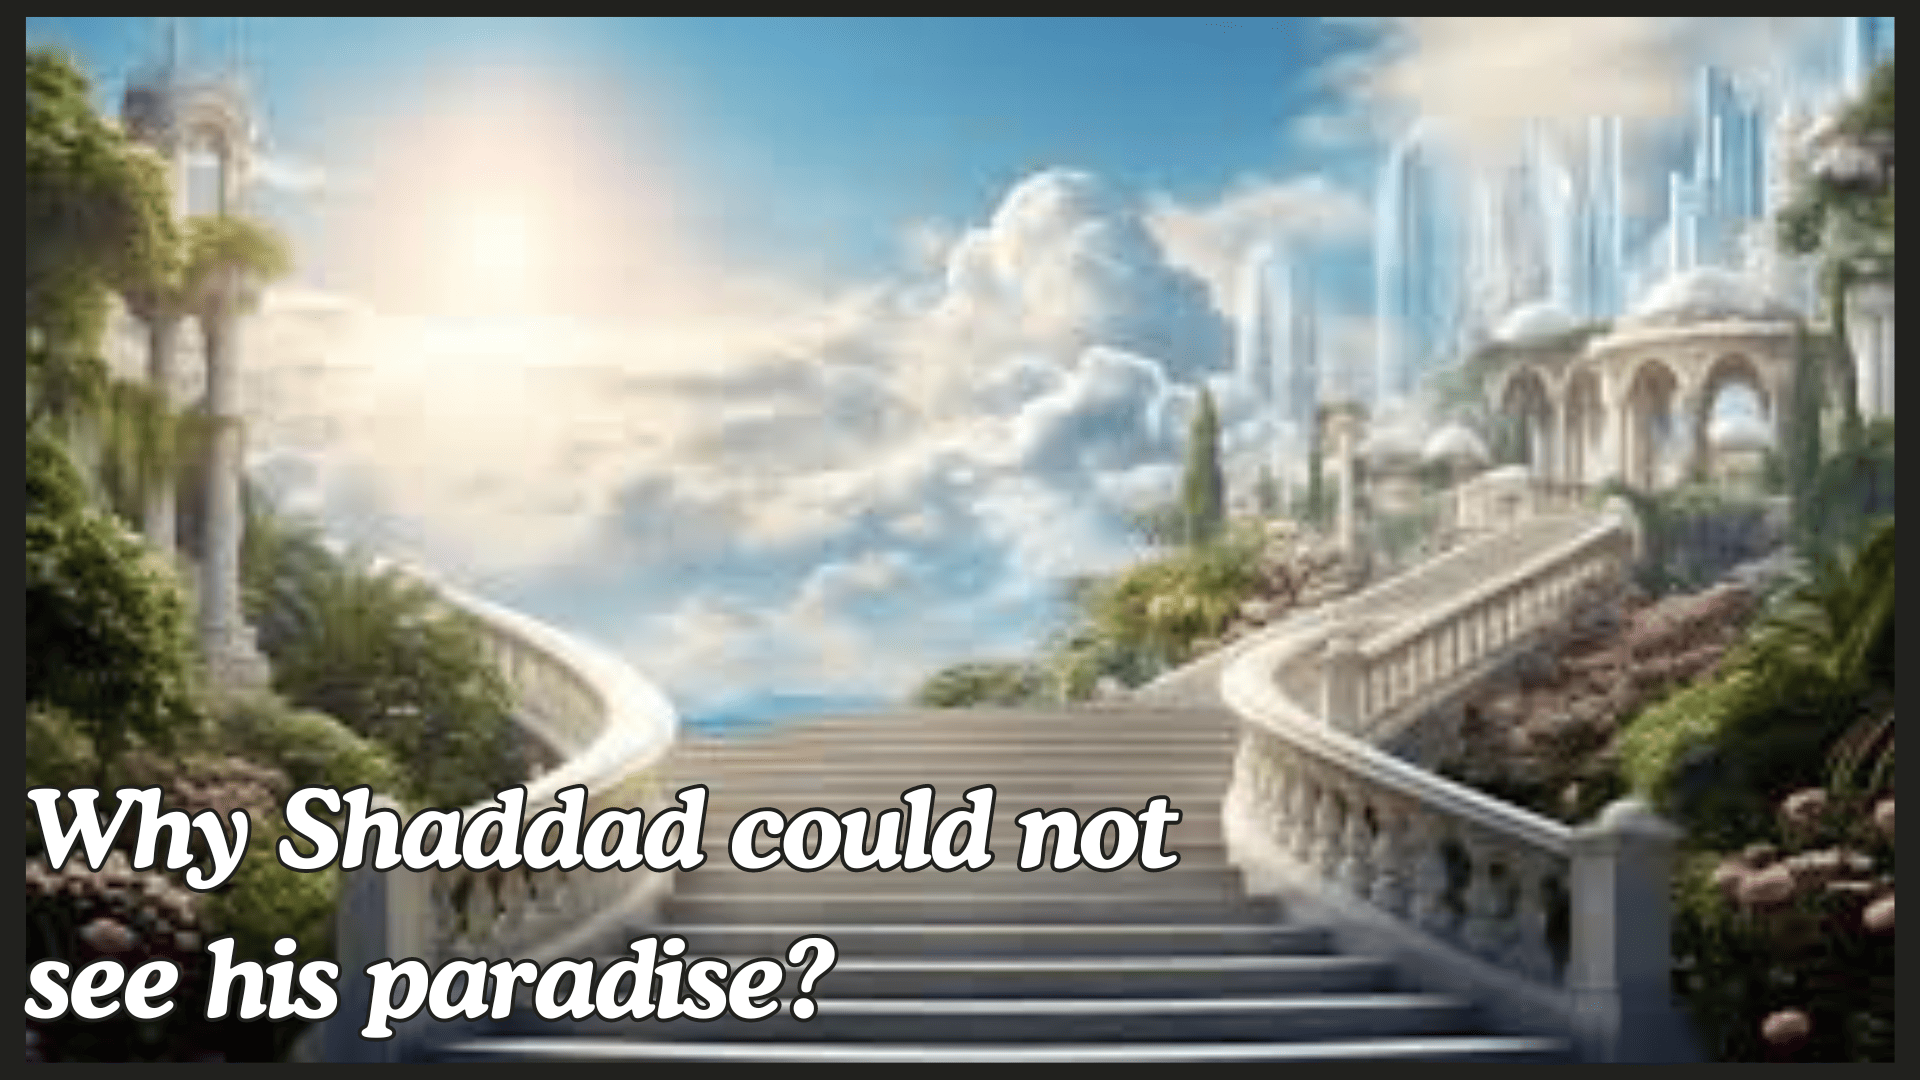  Why Shaddad could not see his paradise